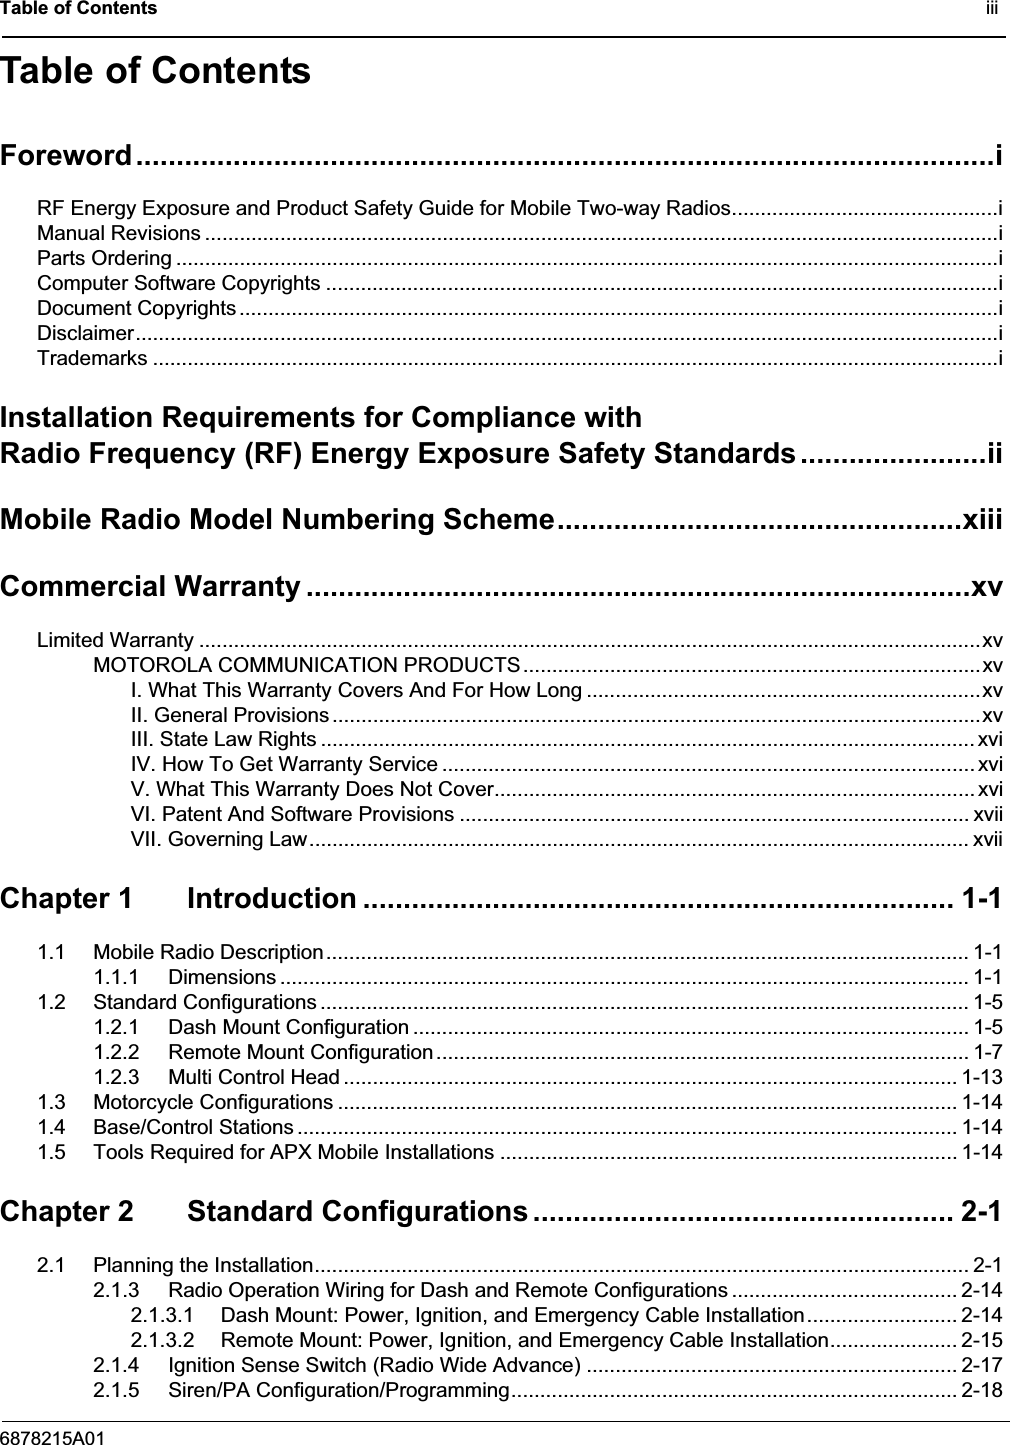 Table of Contents                                                                                              iii6878215A01Table of ContentsForeword..........................................................................................................iRF Energy Exposure and Product Safety Guide for Mobile Two-way Radios..............................................iManual Revisions .........................................................................................................................................iParts Ordering ..............................................................................................................................................iComputer Software Copyrights ....................................................................................................................iDocument Copyrights ...................................................................................................................................iDisclaimer.....................................................................................................................................................iTrademarks ..................................................................................................................................................iInstallation Requirements for Compliance withRadio Frequency (RF) Energy Exposure Safety Standards.......................iiMobile Radio Model Numbering Scheme..................................................xiiiCommercial Warranty ..................................................................................xvLimited Warranty .......................................................................................................................................xvMOTOROLA COMMUNICATION PRODUCTS...............................................................................xvI. What This Warranty Covers And For How Long ....................................................................xvII. General Provisions ................................................................................................................xvIII. State Law Rights ................................................................................................................. xviIV. How To Get Warranty Service ............................................................................................ xviV. What This Warranty Does Not Cover................................................................................... xviVI. Patent And Software Provisions ........................................................................................ xviiVII. Governing Law.................................................................................................................. xviiChapter 1 Introduction ......................................................................... 1-11.1 Mobile Radio Description............................................................................................................... 1-11.1.1 Dimensions ....................................................................................................................... 1-11.2 Standard Configurations ................................................................................................................ 1-51.2.1 Dash Mount Configuration ................................................................................................ 1-51.2.2 Remote Mount Configuration............................................................................................ 1-71.2.3 Multi Control Head .......................................................................................................... 1-131.3 Motorcycle Configurations ........................................................................................................... 1-141.4 Base/Control Stations .................................................................................................................. 1-141.5 Tools Required for APX Mobile Installations ............................................................................... 1-14Chapter 2 Standard Configurations .................................................... 2-12.1 Planning the Installation................................................................................................................. 2-12.1.3 Radio Operation Wiring for Dash and Remote Configurations ....................................... 2-142.1.3.1 Dash Mount: Power, Ignition, and Emergency Cable Installation.......................... 2-142.1.3.2 Remote Mount: Power, Ignition, and Emergency Cable Installation...................... 2-152.1.4 Ignition Sense Switch (Radio Wide Advance) ................................................................ 2-172.1.5 Siren/PA Configuration/Programming............................................................................. 2-18